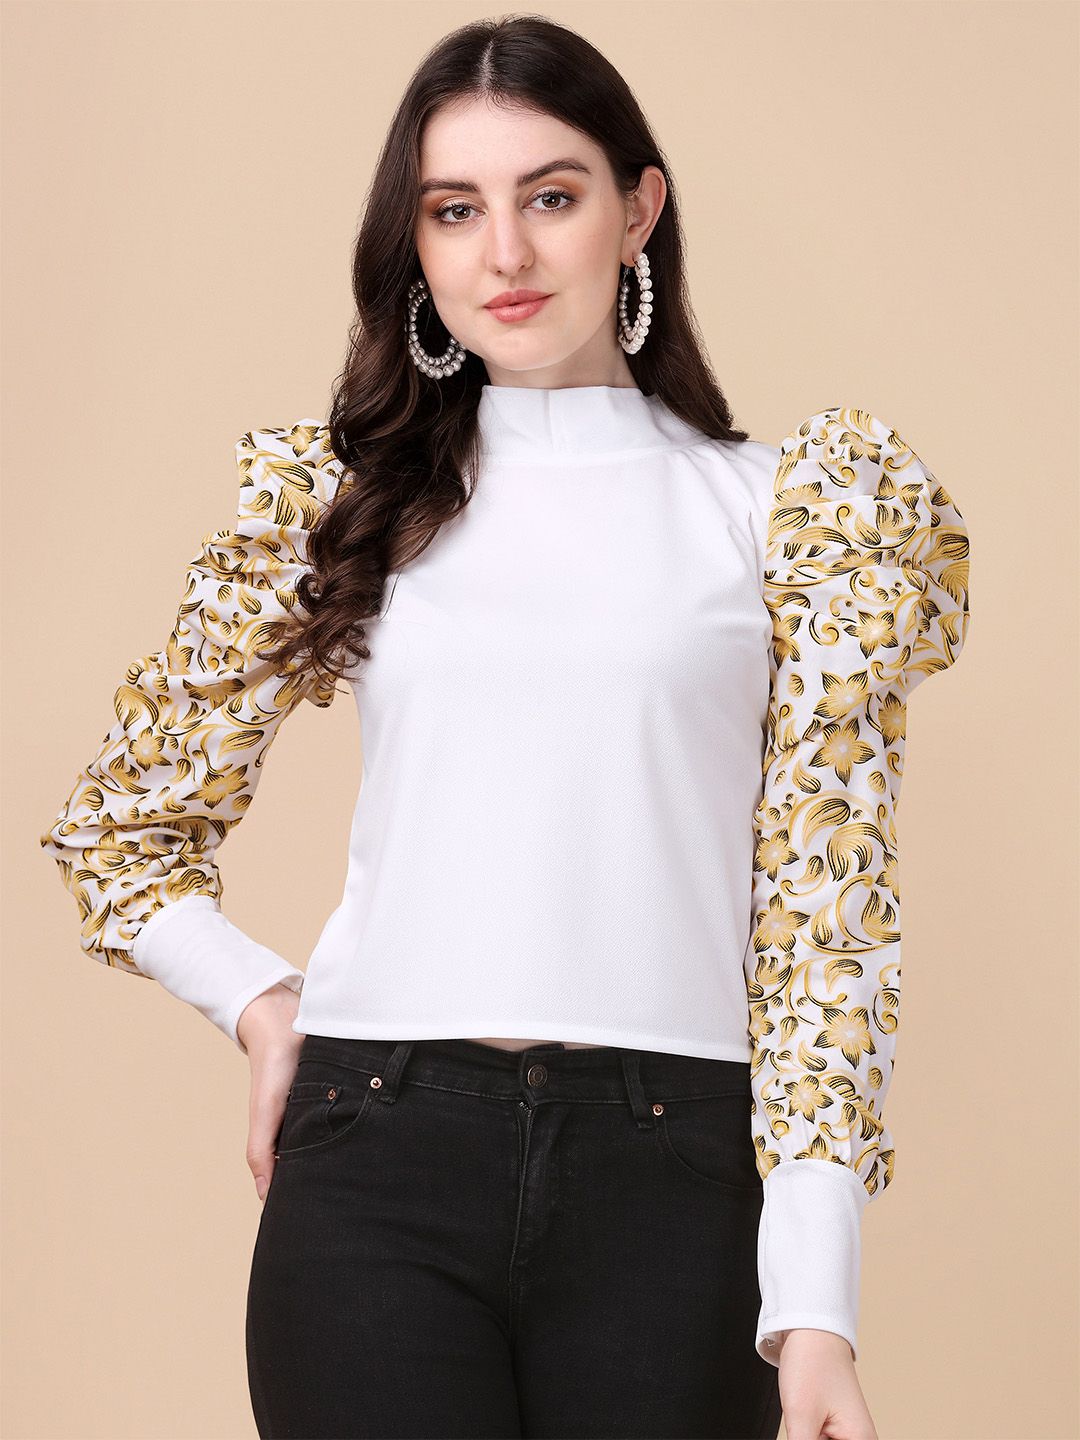 Paralians Floral Printed Puff Sleeves High Neck Top Price in India